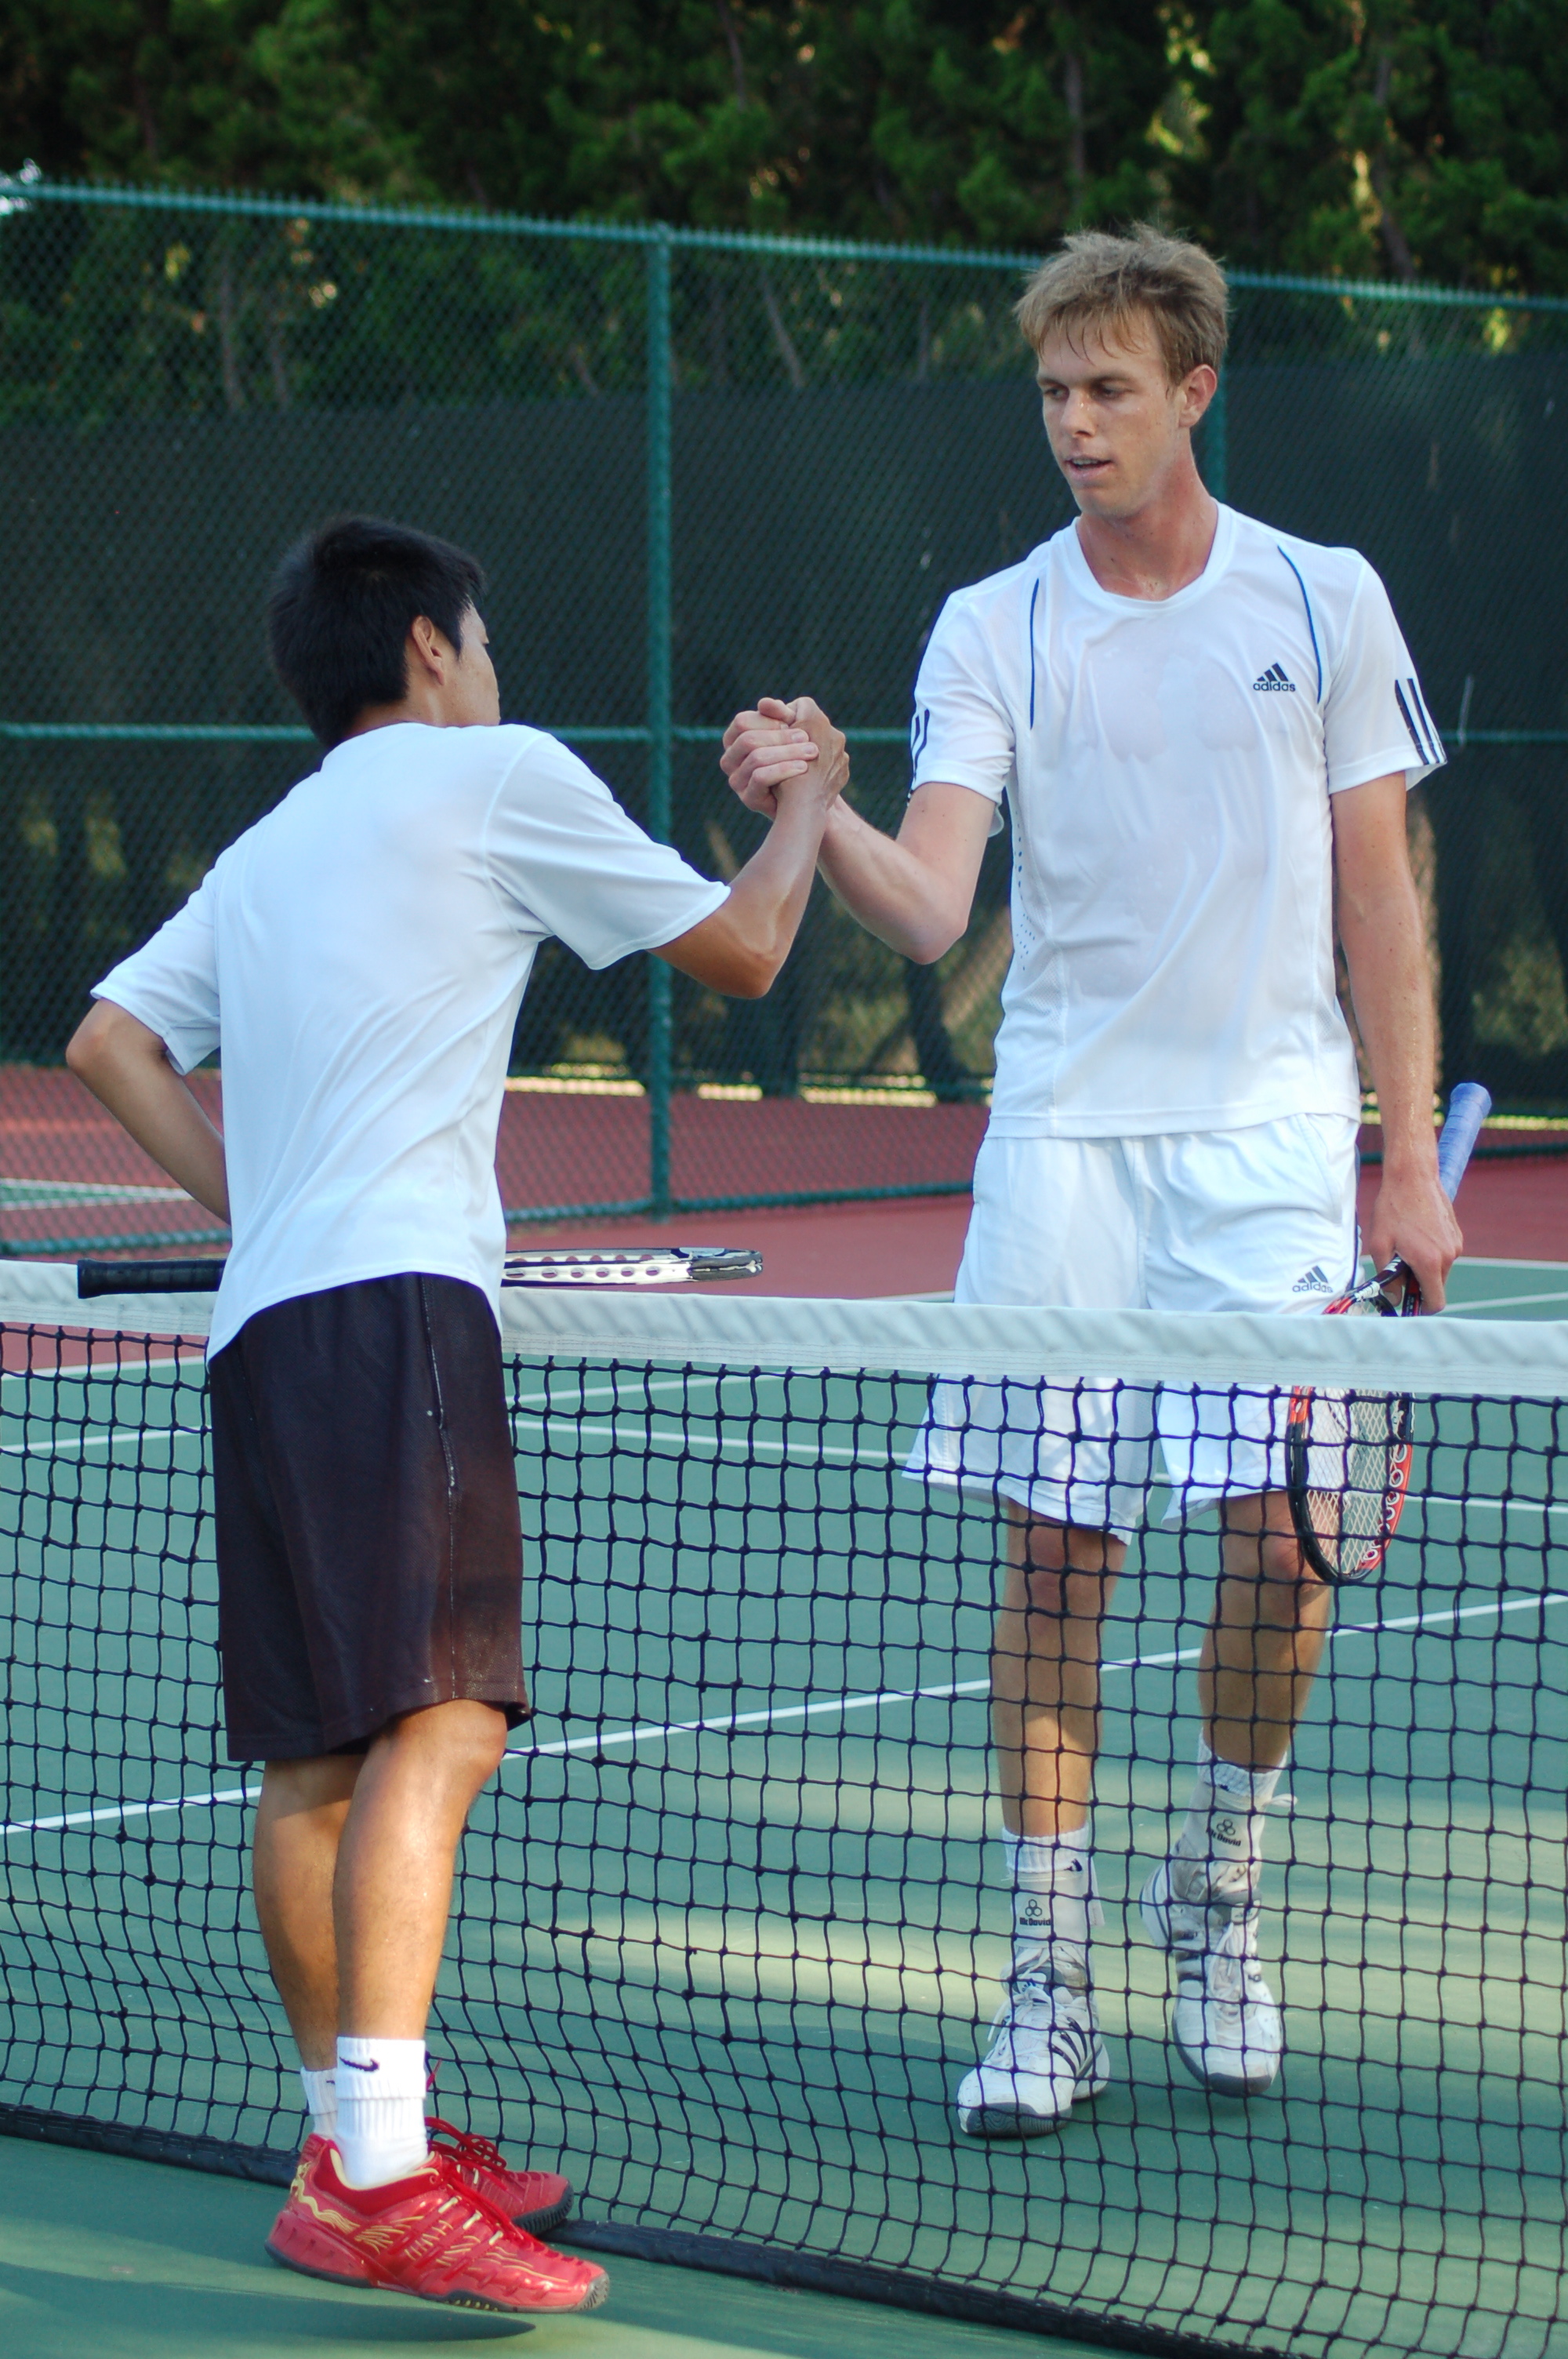 Phillip King (left) shakes hands with Sam Querrey after winning their semifinal match, 21-20, during Sunday's Shotgun 21 World Championships at the Palisades Tennis Center. Photo: Jared Rosen